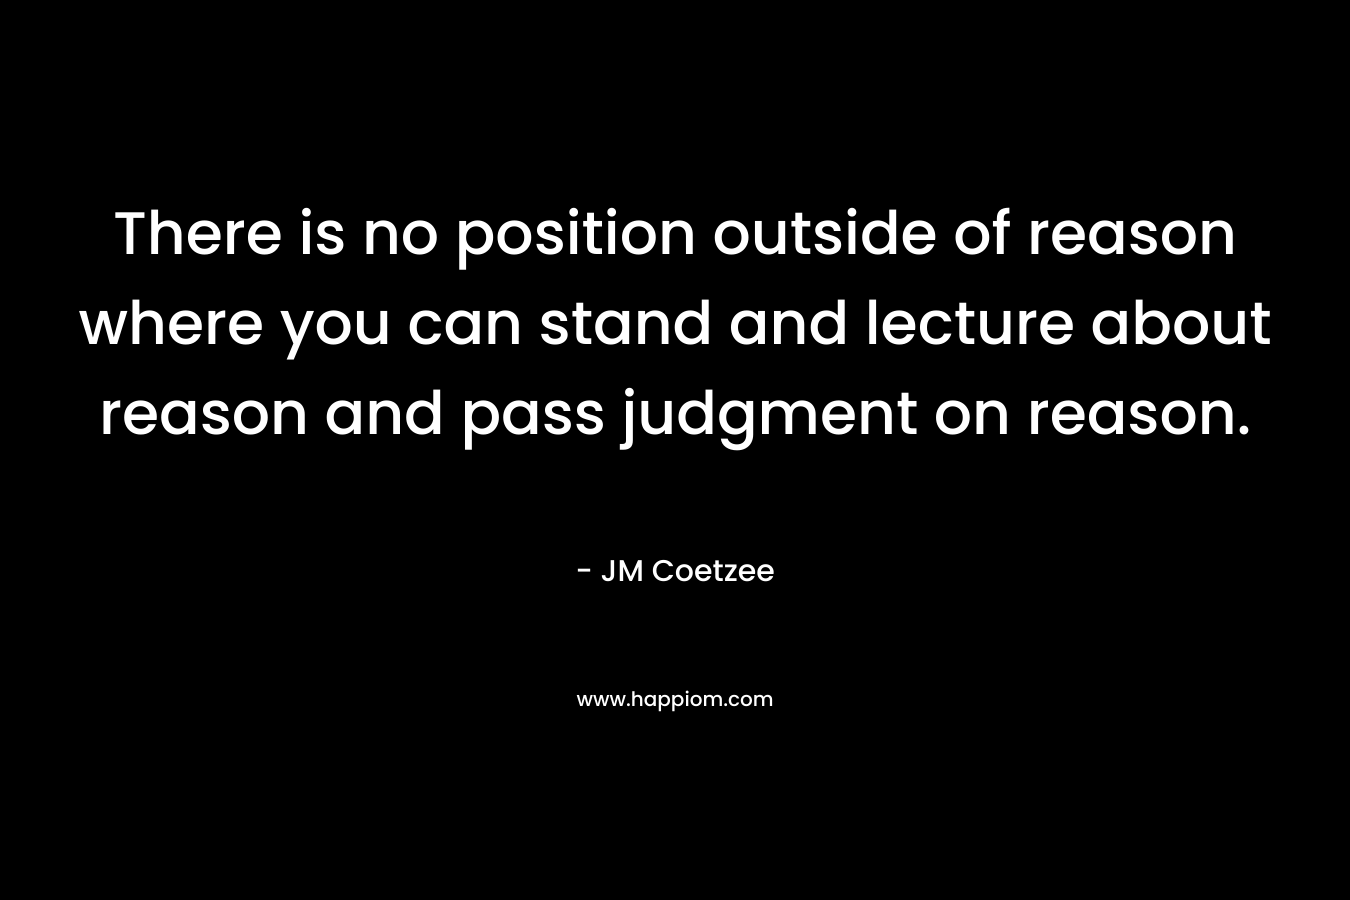 There is no position outside of reason where you can stand and lecture about reason and pass judgment on reason.